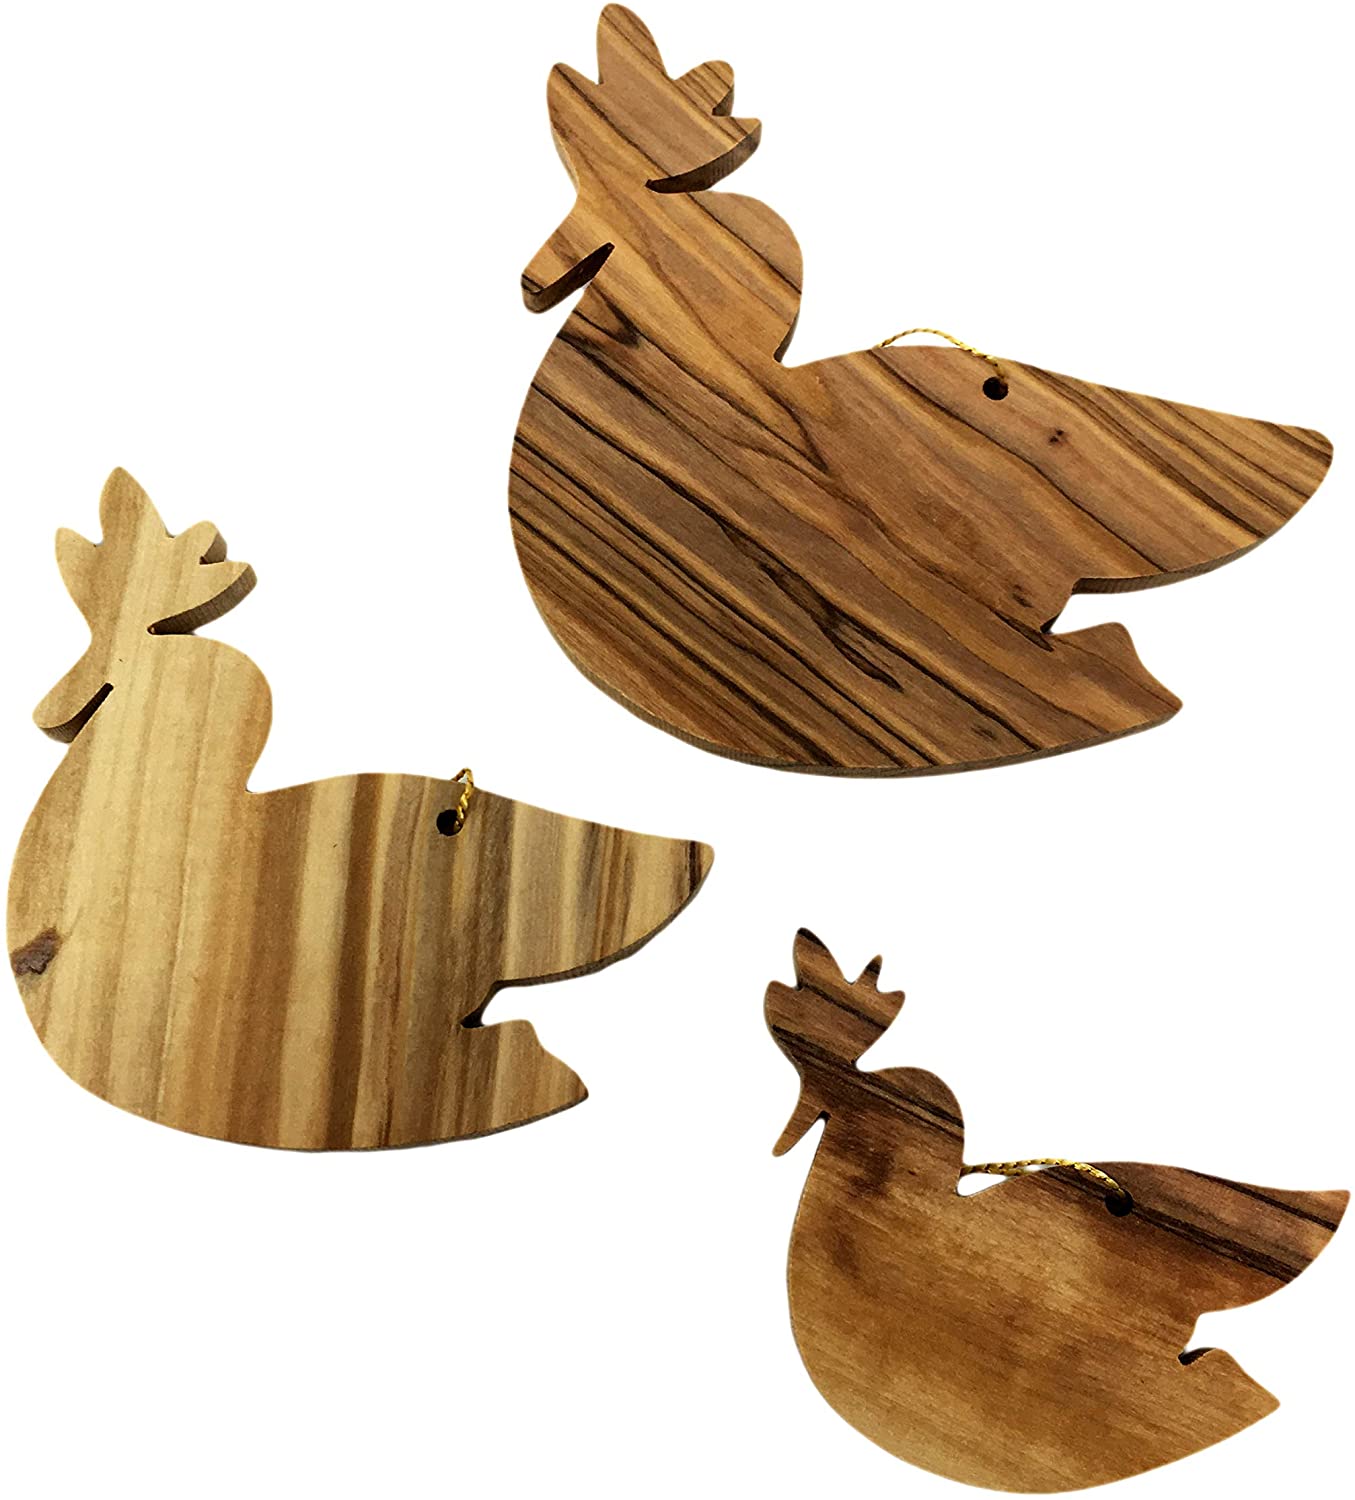 Olive Wood Handcrafted Rooster Christmas Tree Hanging Ornaments Hand Crafted by Artisans in The Holy Land- 4